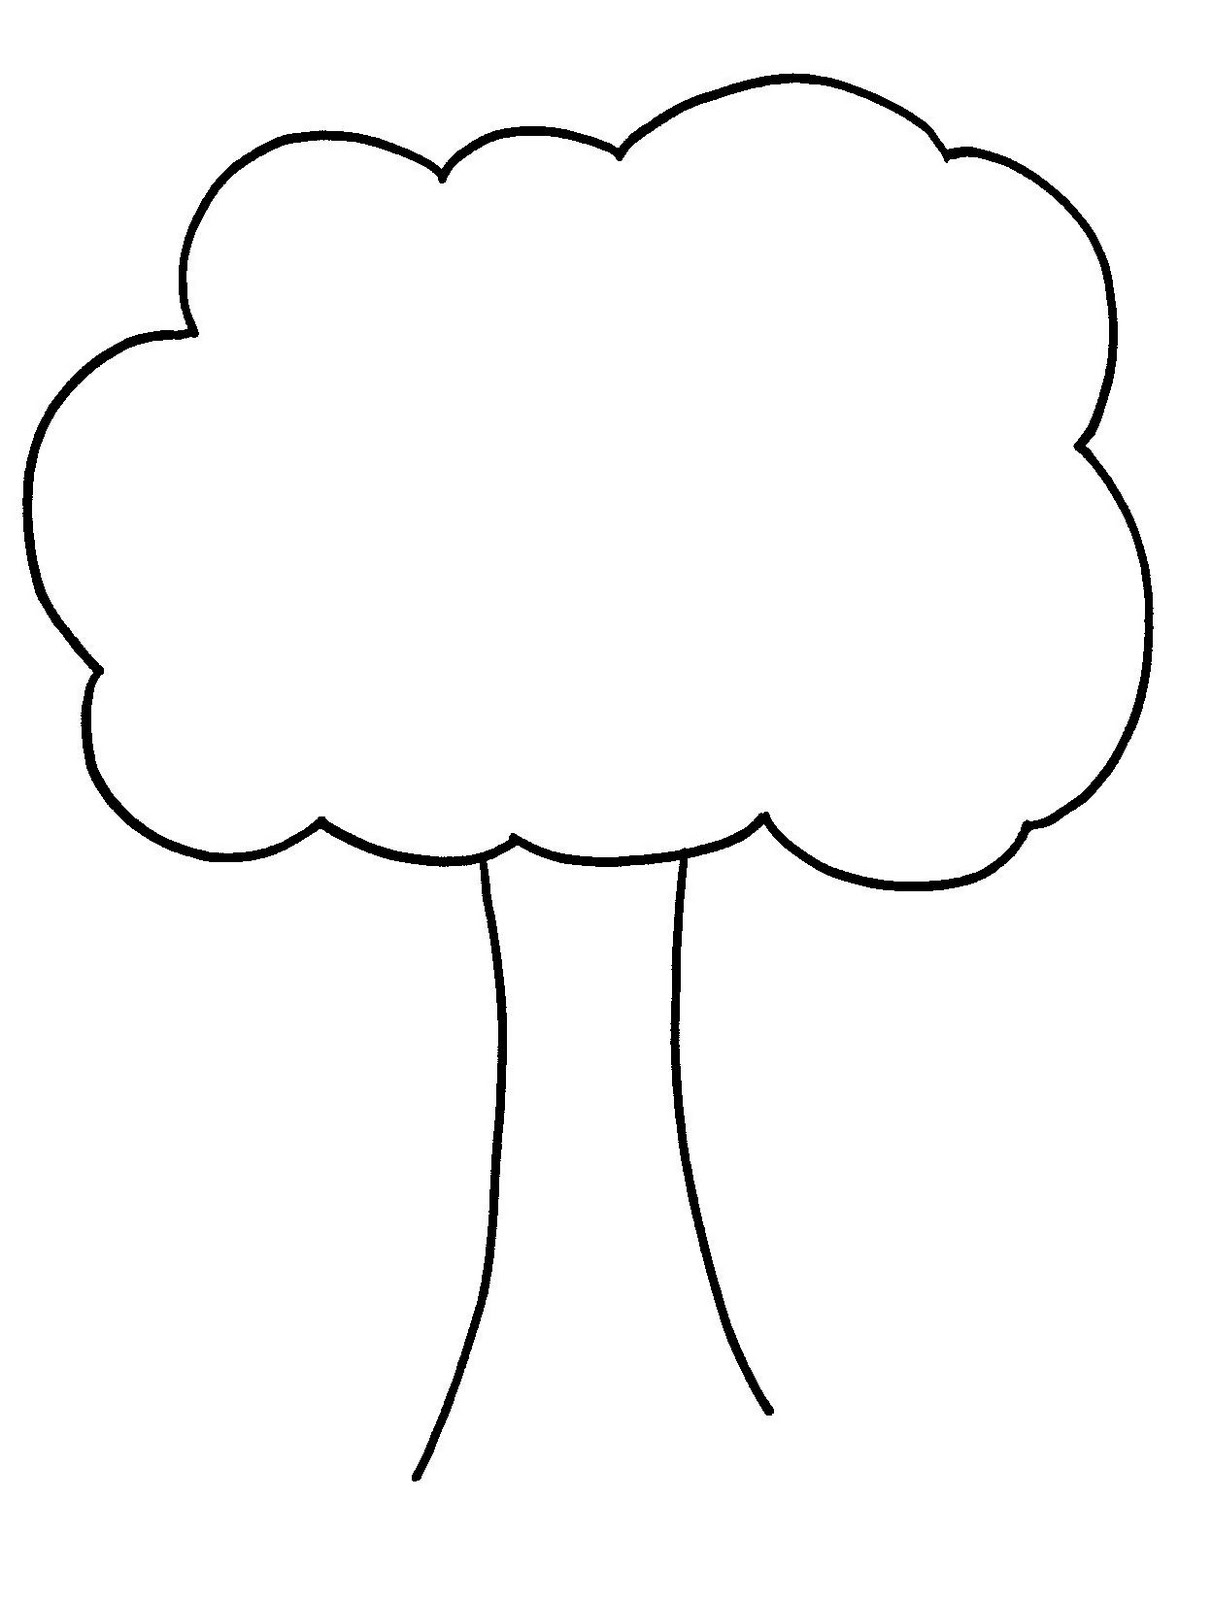 Best Photos of Simple Tree Outline - Tree Outline Clip Art, Tree ...